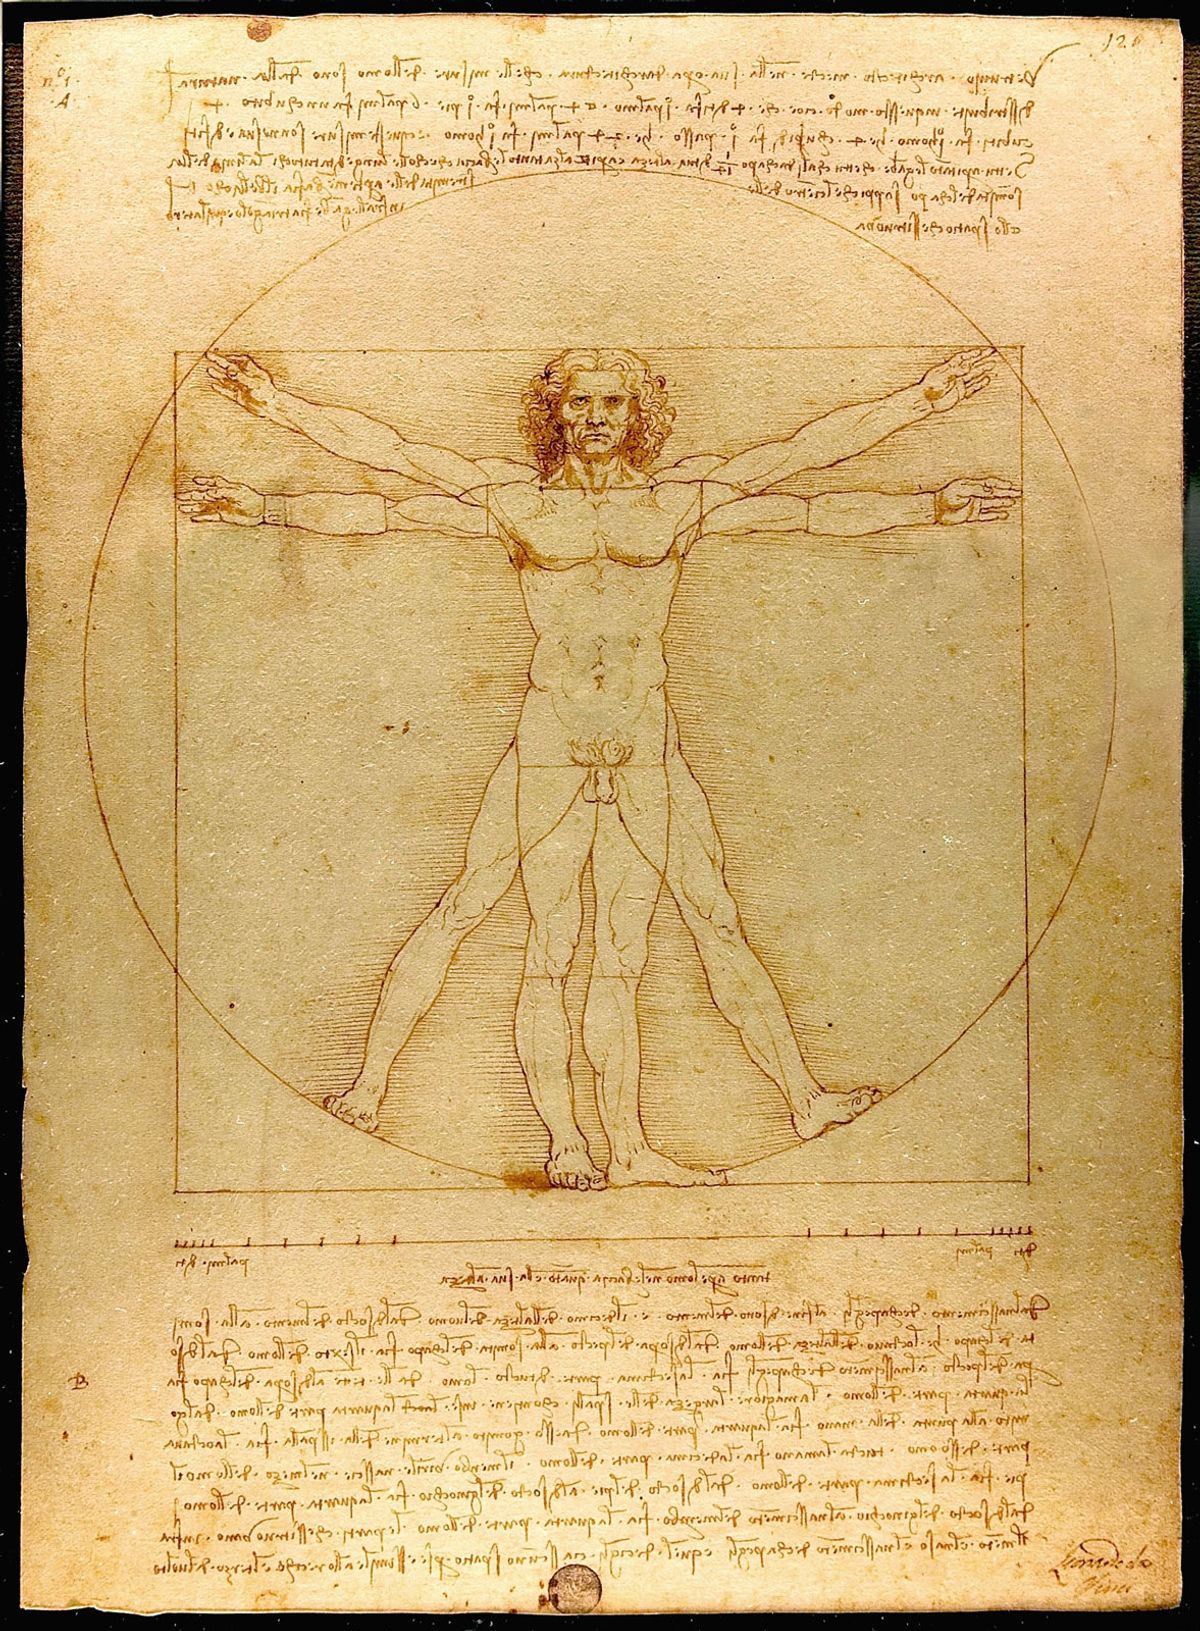 Venice has reserved its position on whether it will lend Leonardo's iconic Vitruvian Man (1490) 